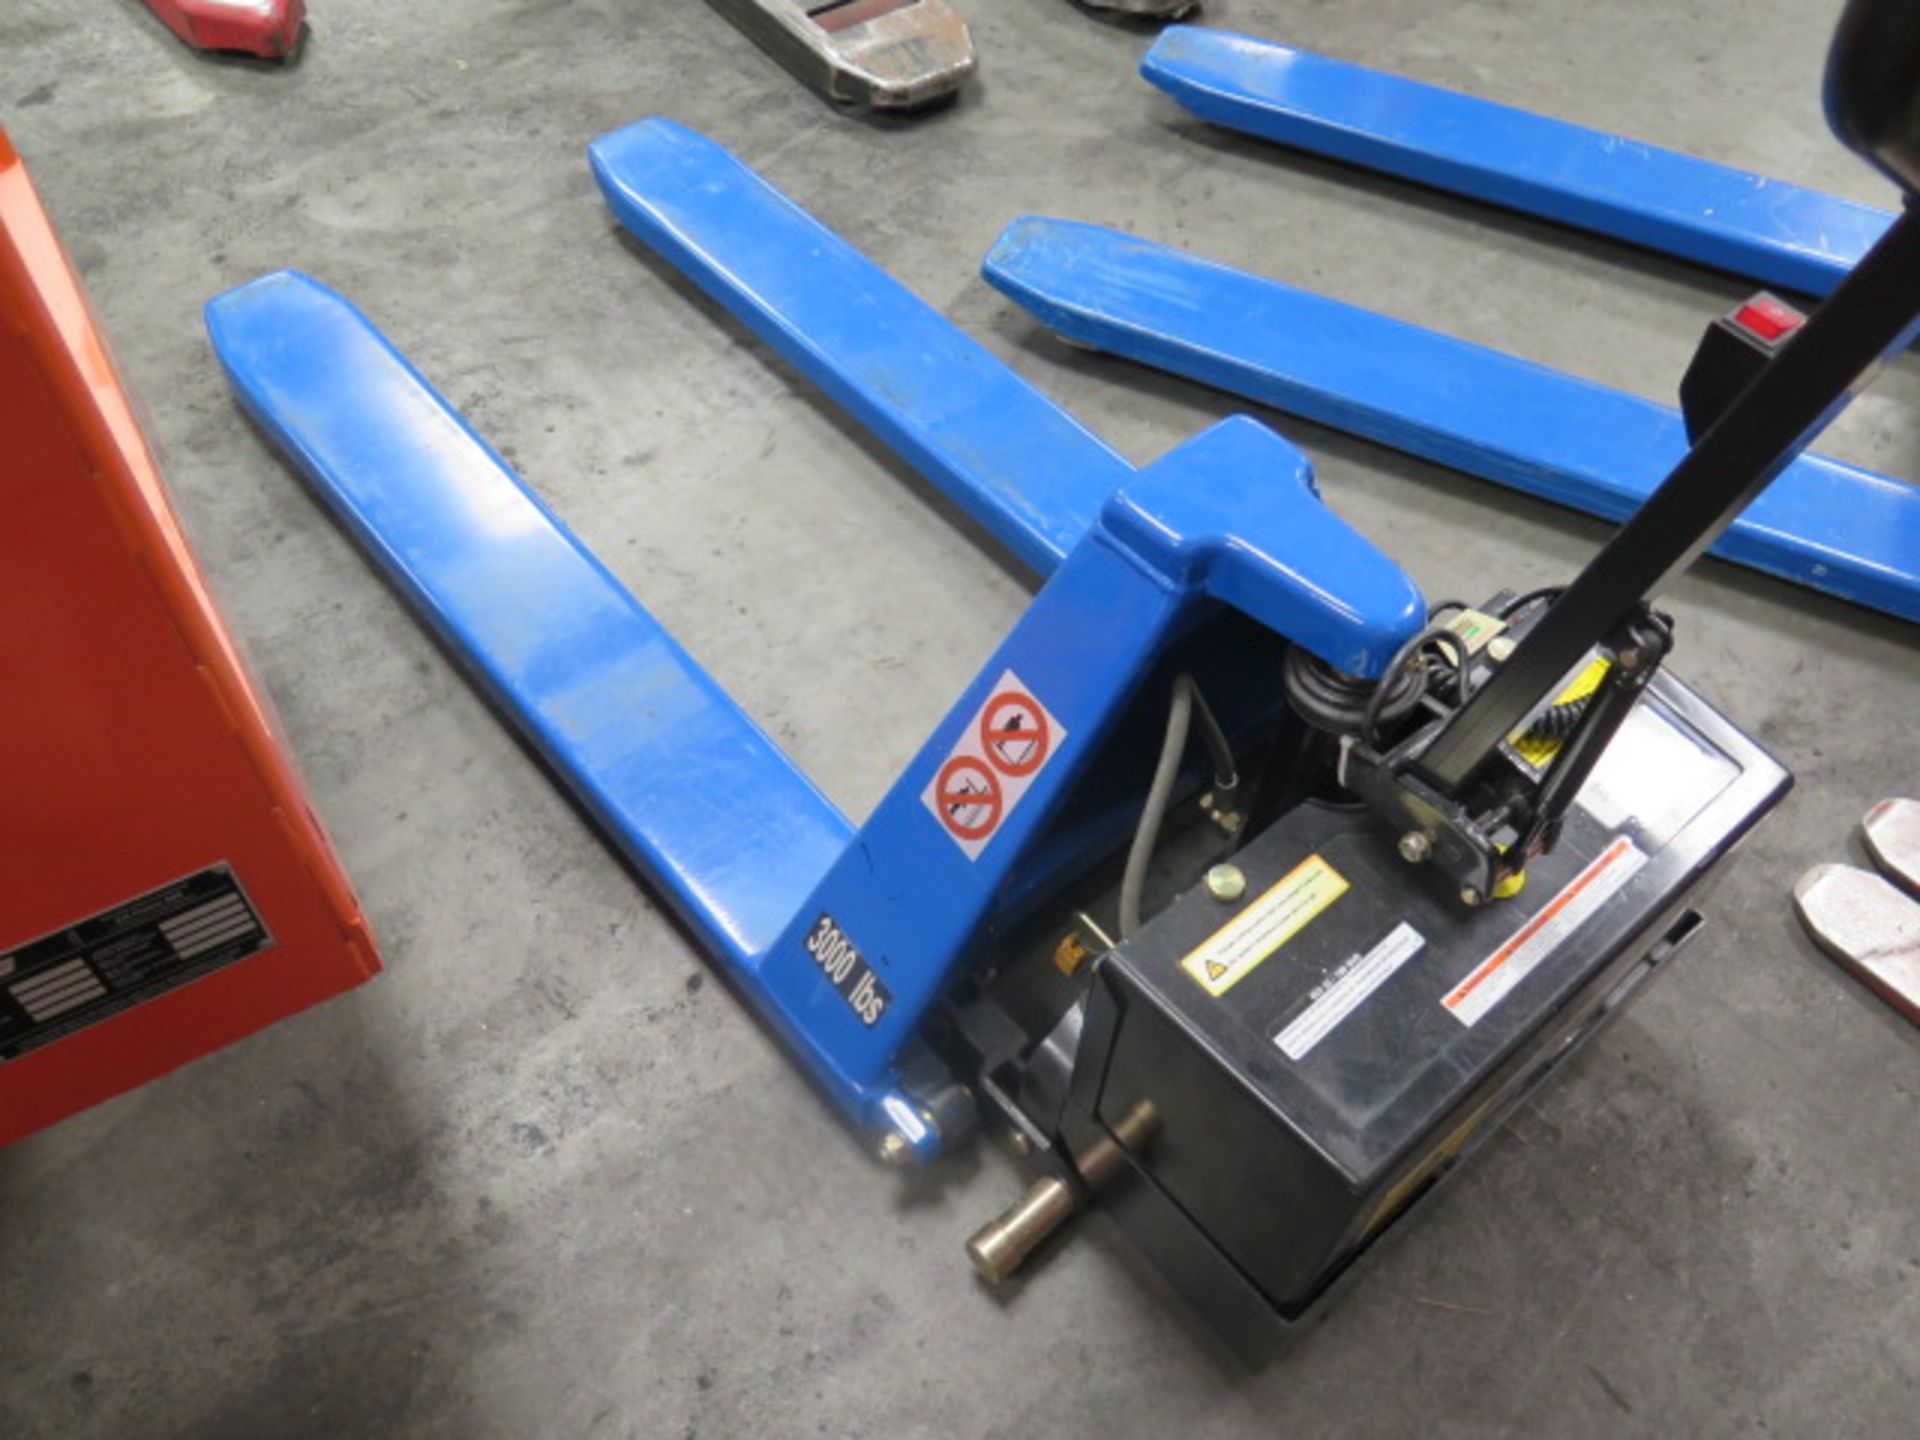 2015 Import mdl L-270-DC-HD 3000 Lb Cap Electric Pallet Jack w/ Built-In Charger, SOLD AS IS - Image 2 of 11